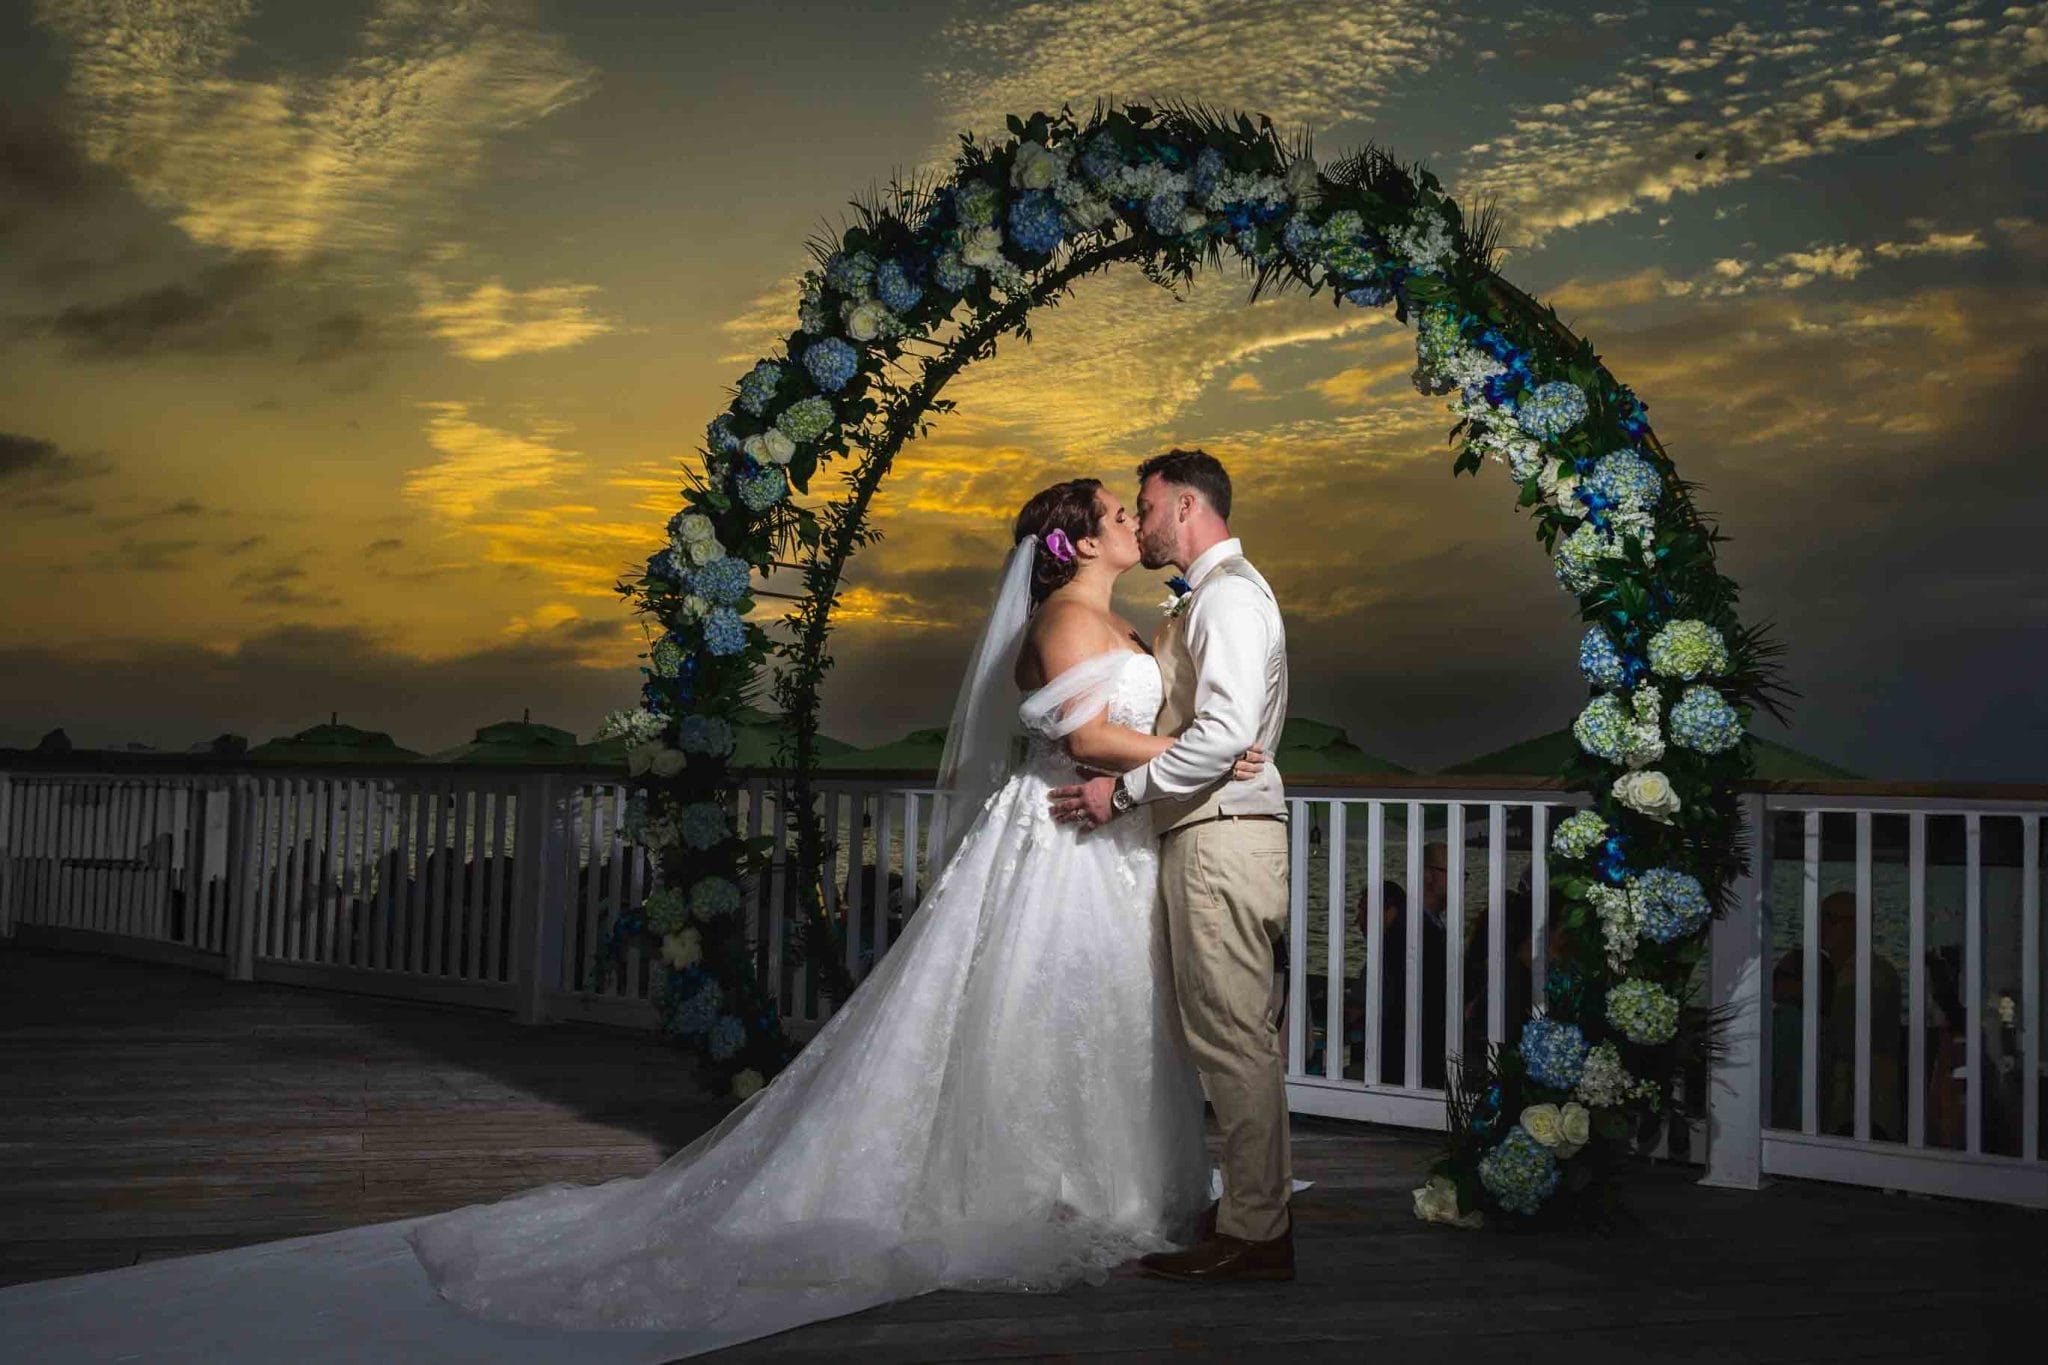 A bride and groom kissing under a floral arch, with a dramatic Key West sunset sky in the background.